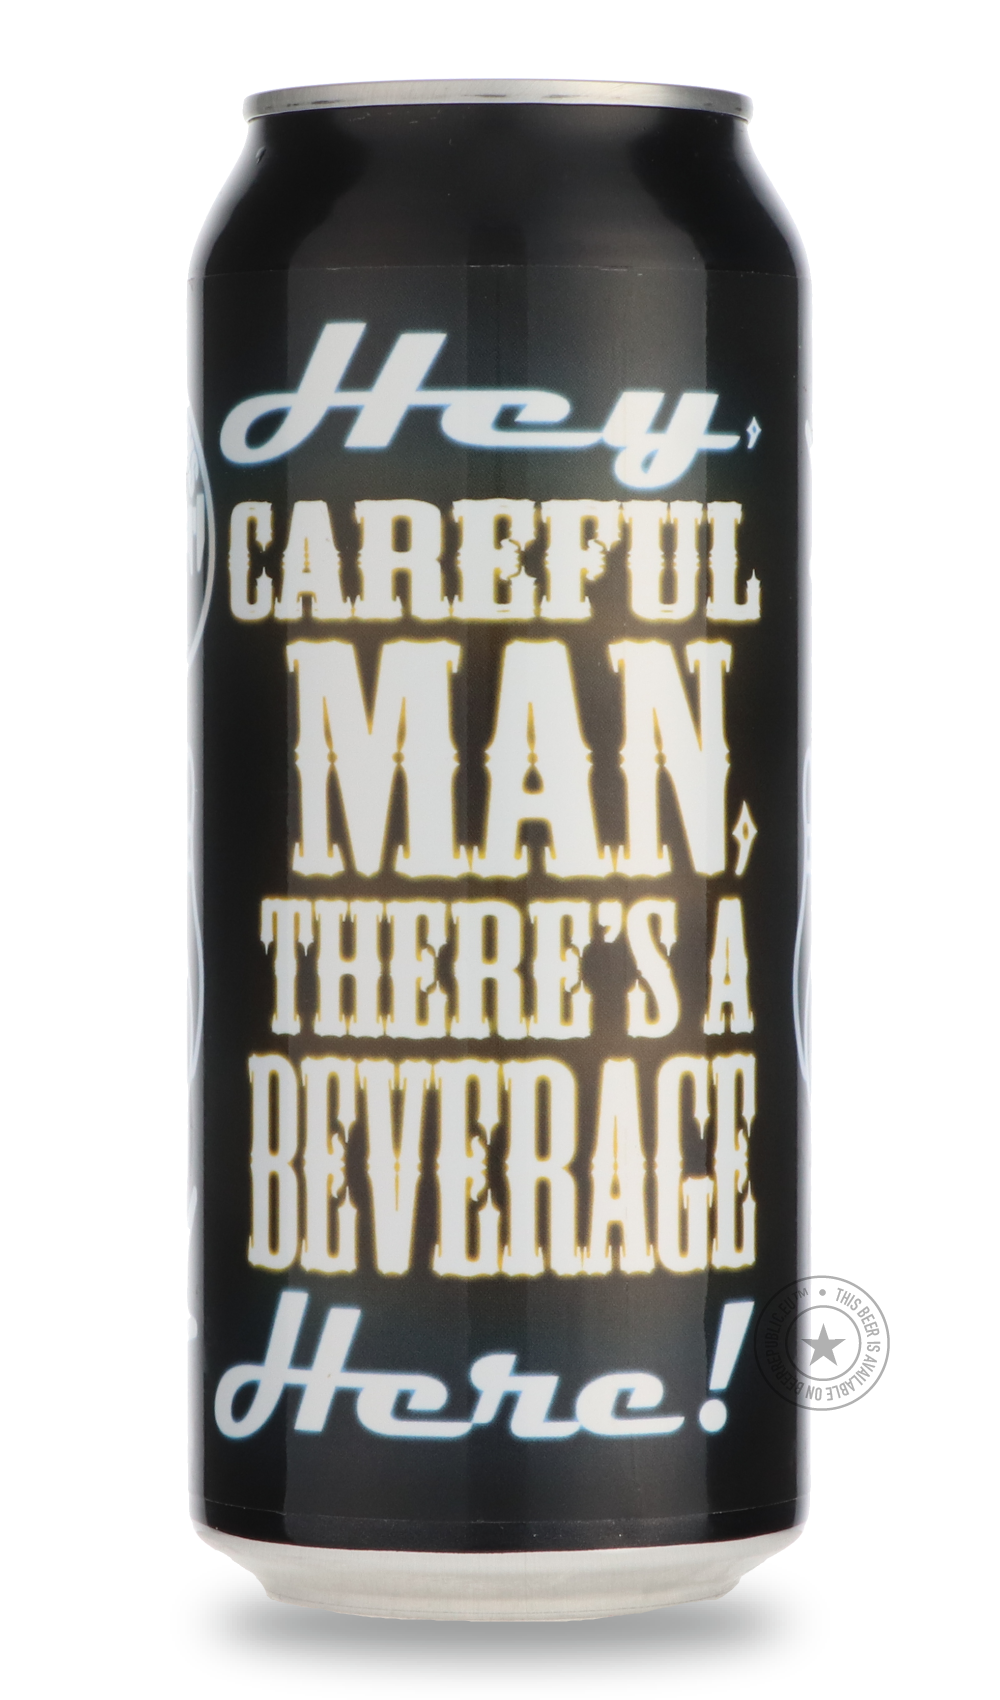 -Pipeworks- Hey, Careful Man, There’s a Beverage Here!-Stout & Porter- Only @ Beer Republic - The best online beer store for American & Canadian craft beer - Buy beer online from the USA and Canada - Bier online kopen - Amerikaans bier kopen - Craft beer store - Craft beer kopen - Amerikanisch bier kaufen - Bier online kaufen - Acheter biere online - IPA - Stout - Porter - New England IPA - Hazy IPA - Imperial Stout - Barrel Aged - Barrel Aged Imperial Stout - Brown - Dark beer - Blond - Blonde - Pilsner - 